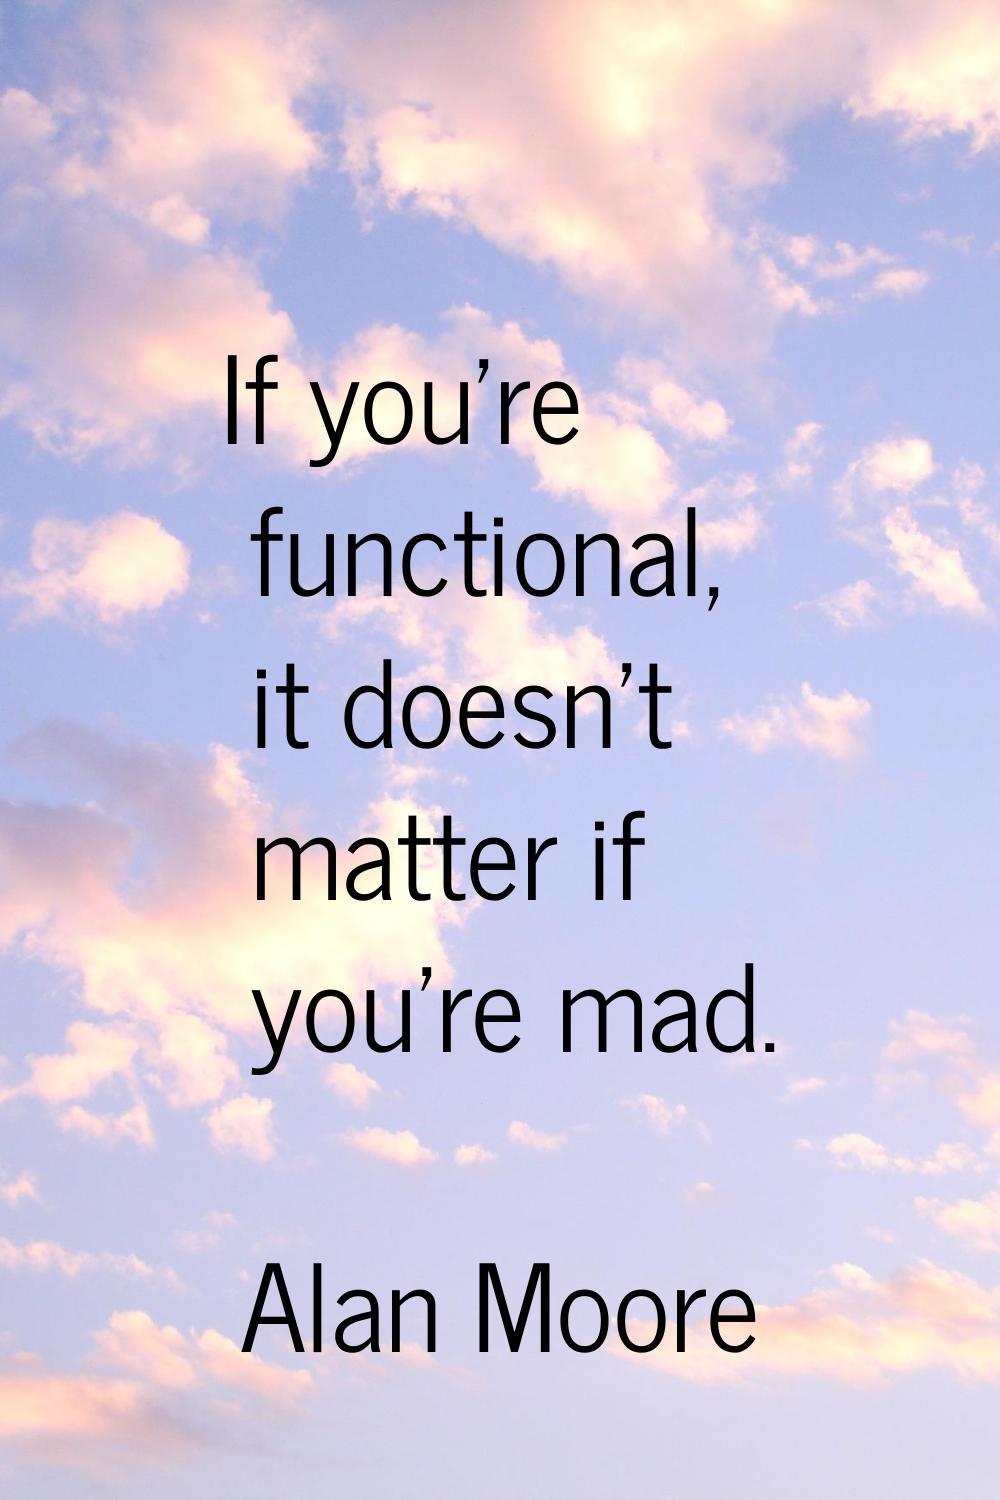 If you're functional, it doesn't matter if you're mad.